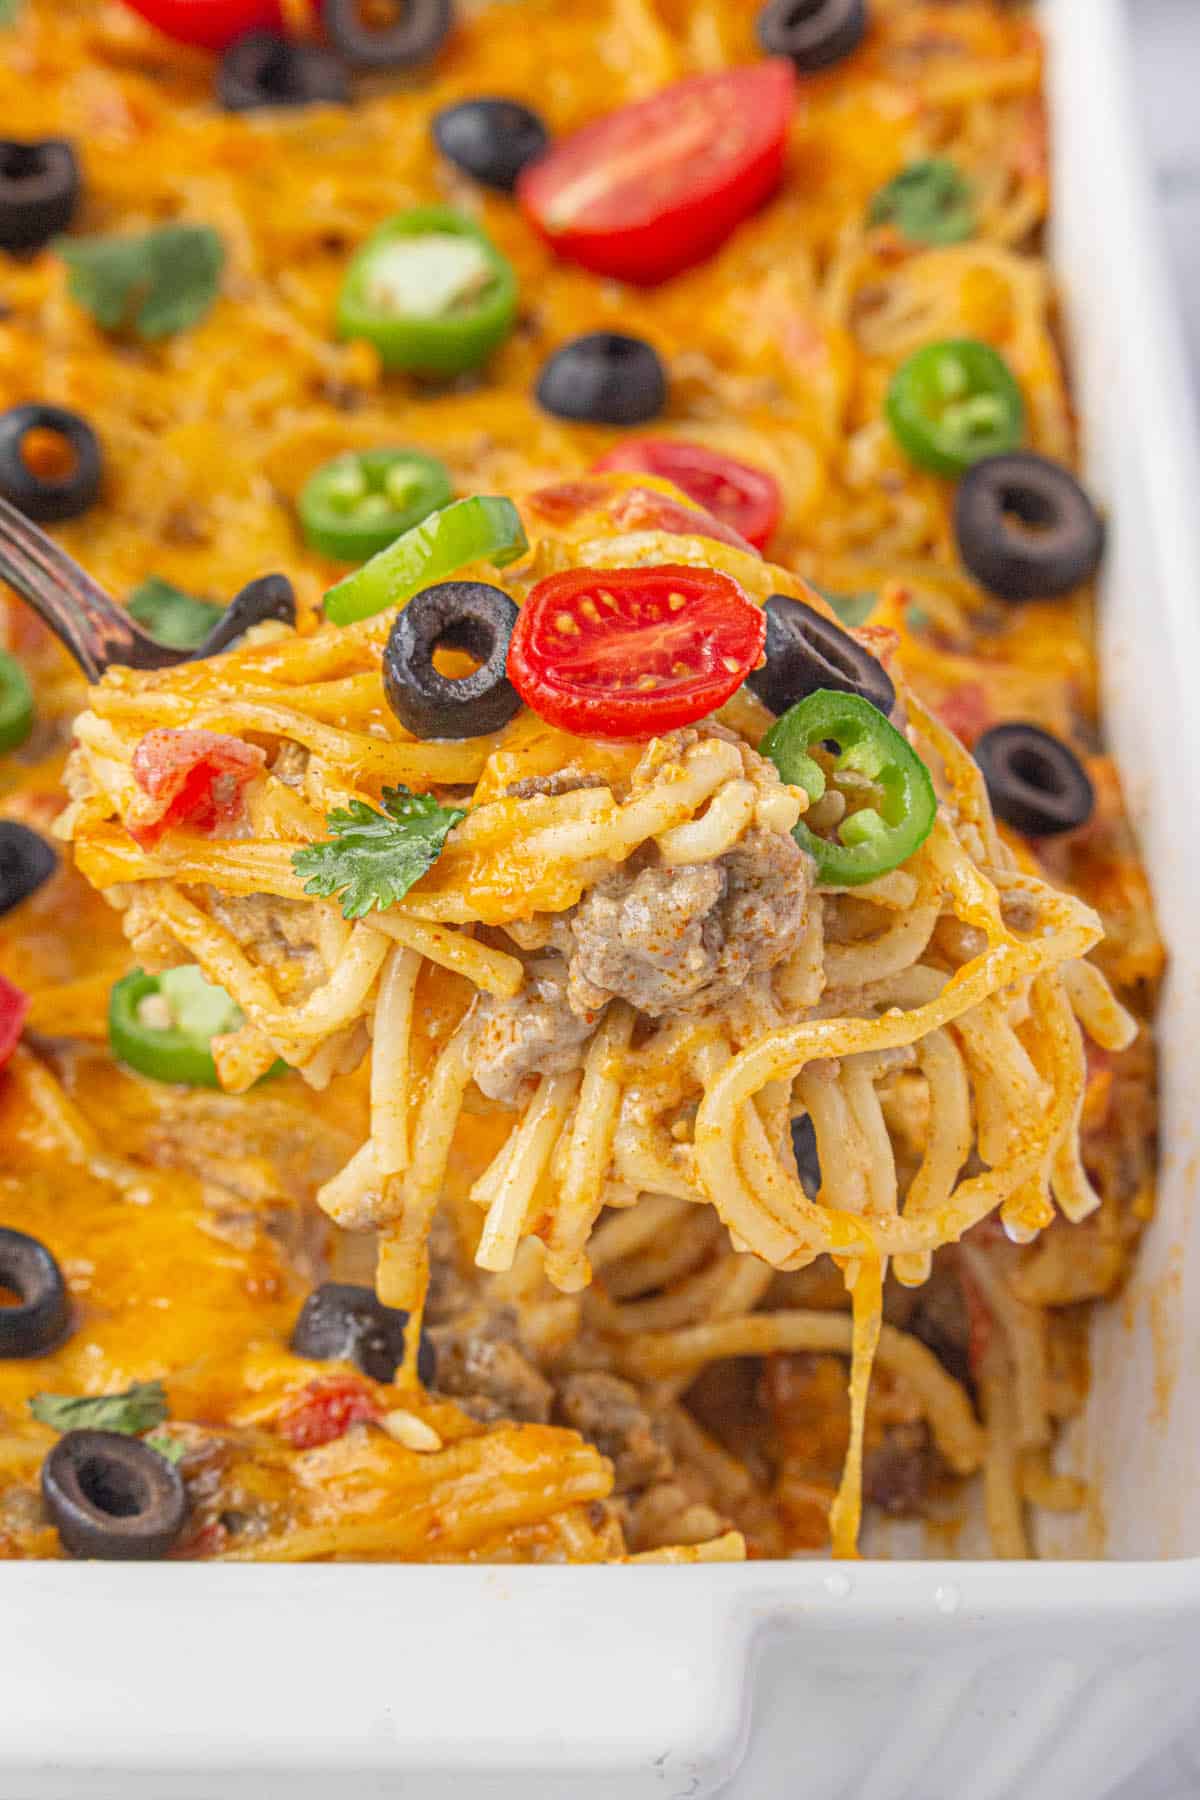 Spaghetti taco casserole in a baking dish, with a serving spoon scooping out a serving.